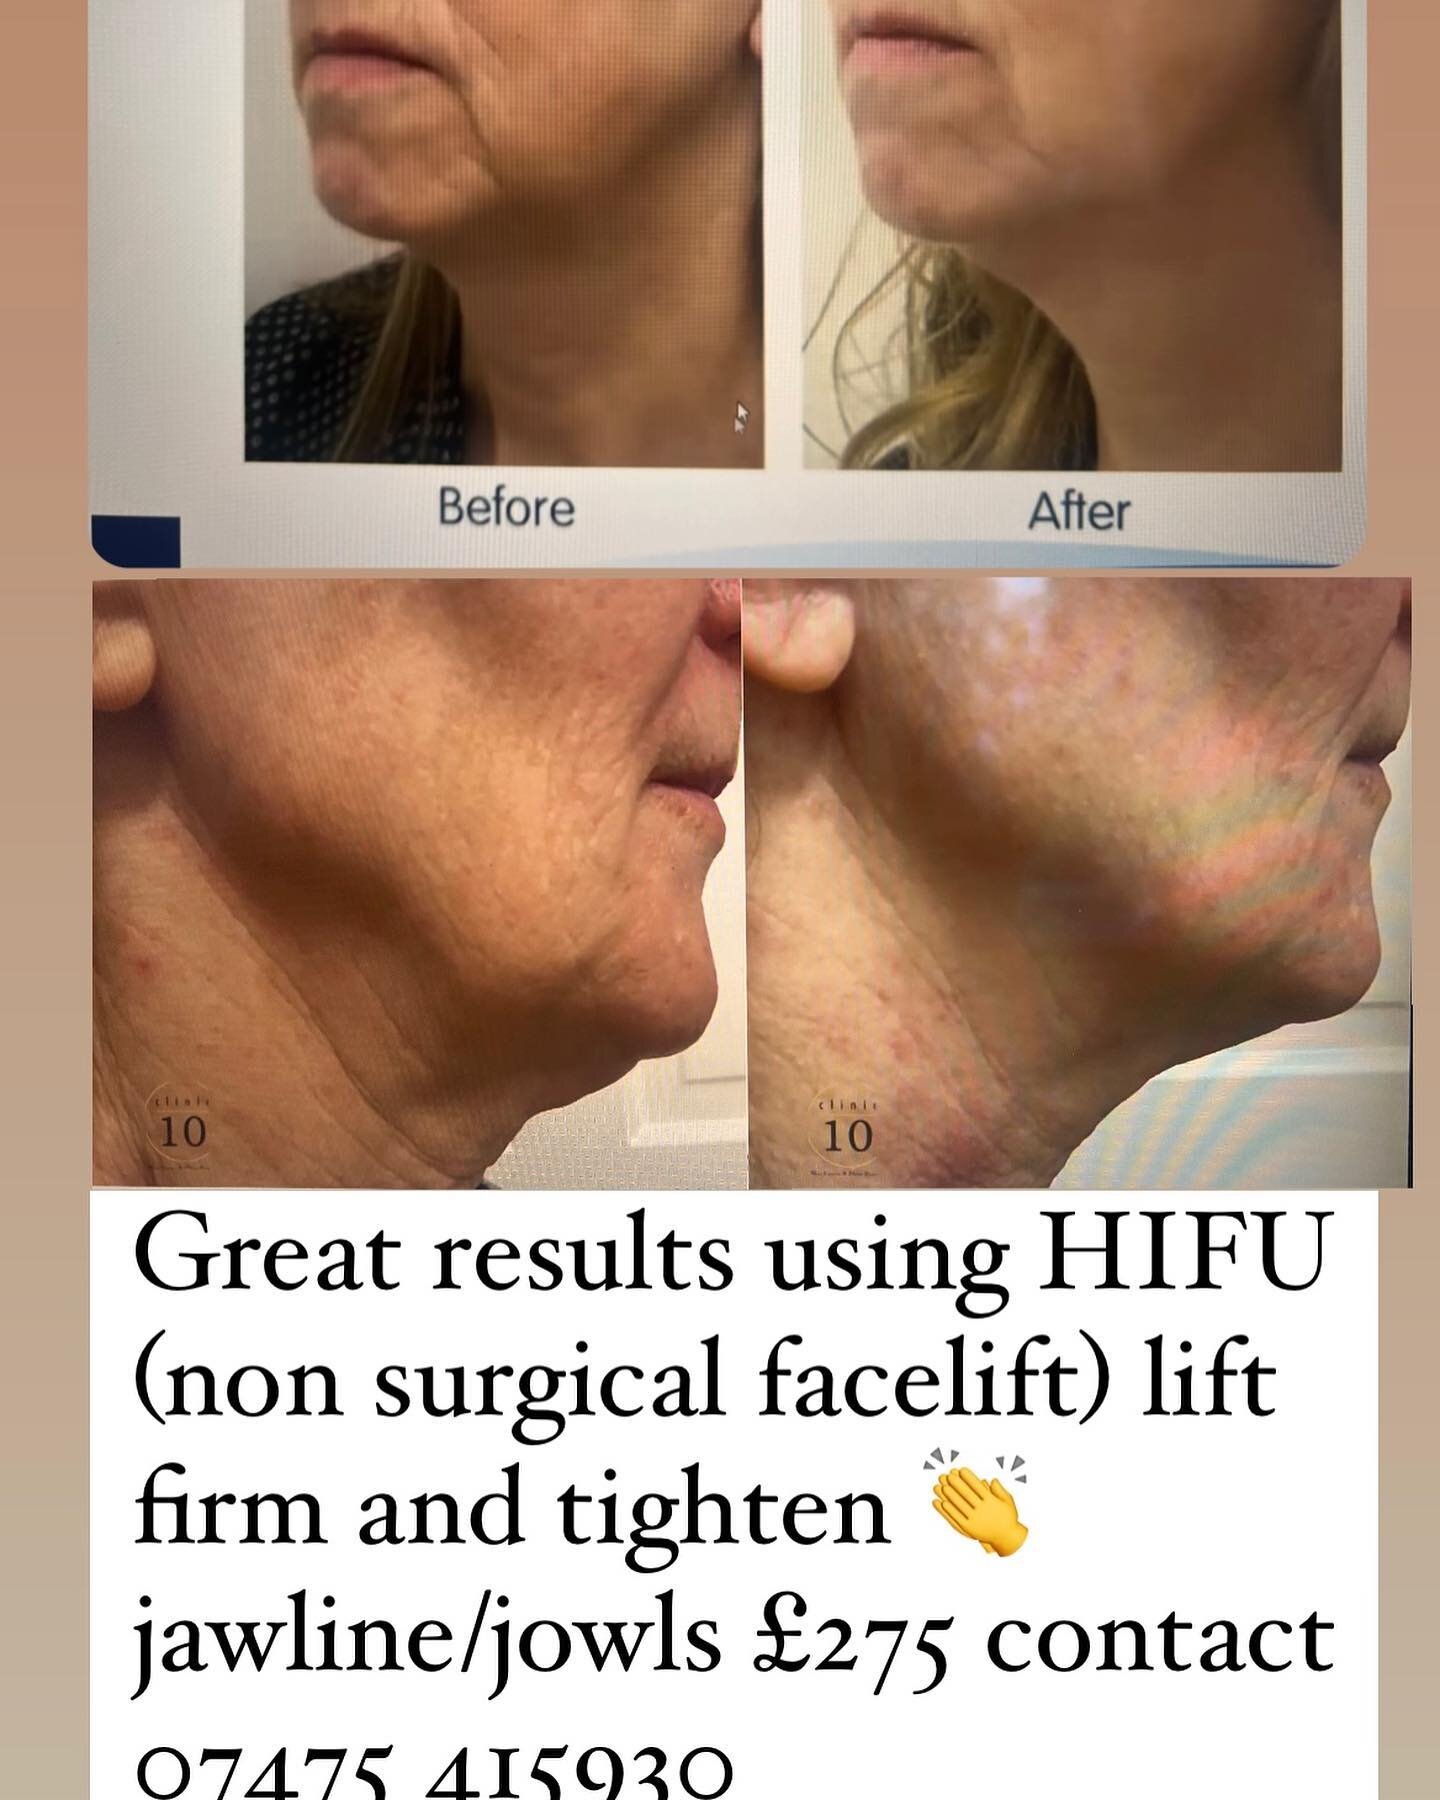 HIFU delivers ultrasound energy below the skin&rsquo;s surface, deep into the superficial musculoaponeurotic system (SMAS) layer, to contract and target all skin layers in one single treatment.

This kick starts collagen regeneration, leaving your sk